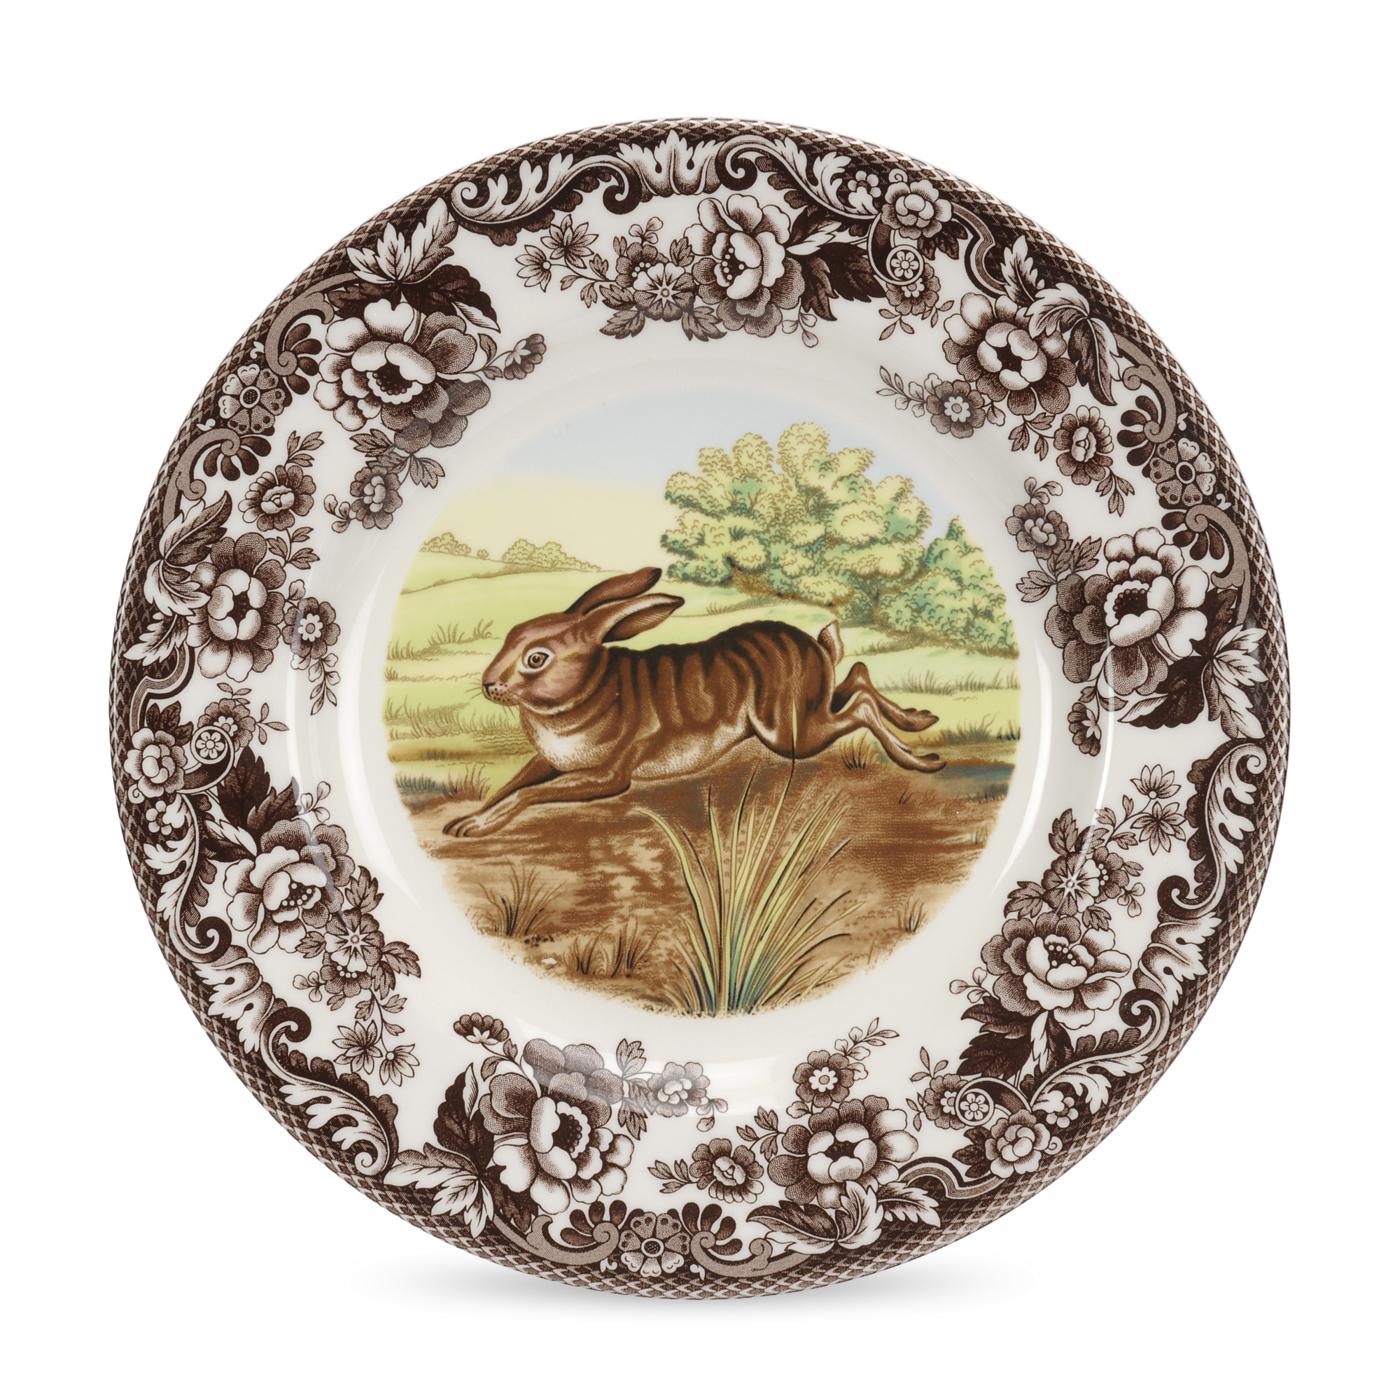 Woodland Dinner Plate 10.5 Inch, Rabbit image number null